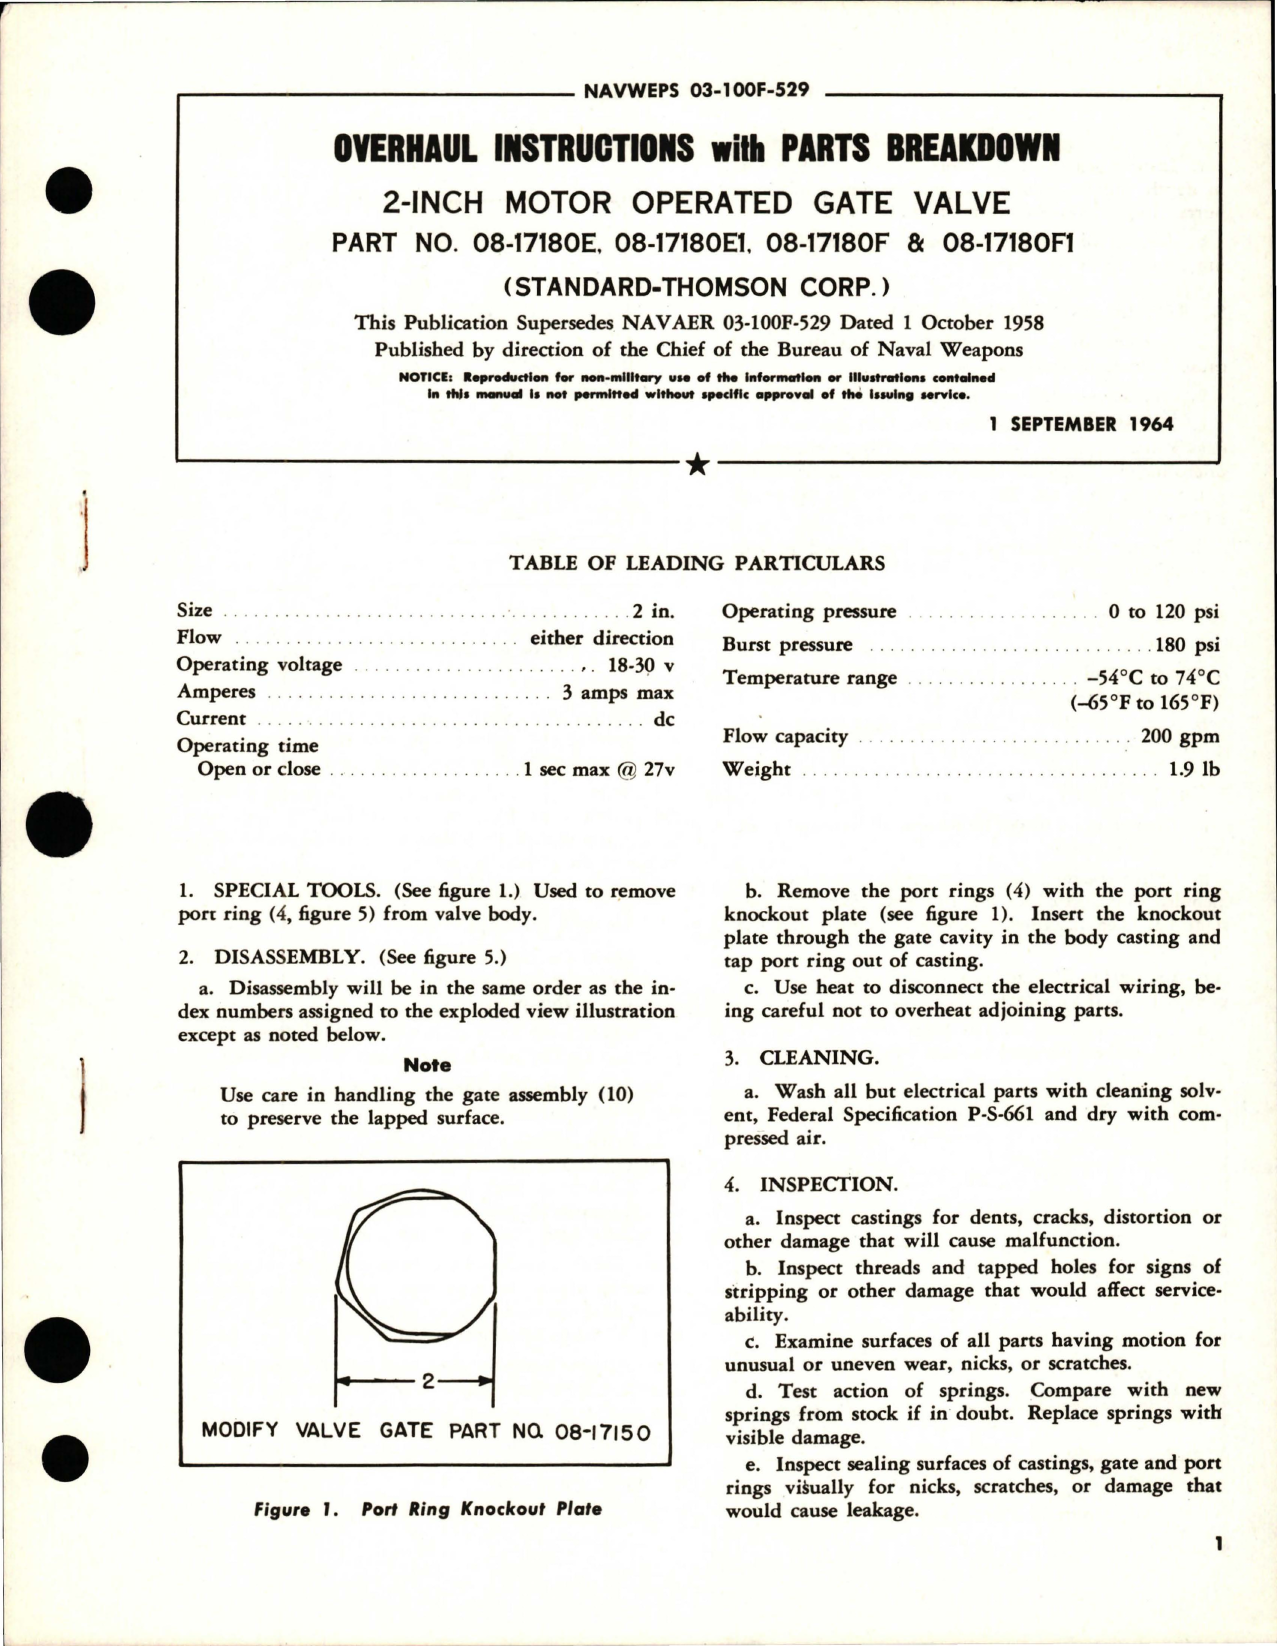 Sample page 1 from AirCorps Library document: Overhaul Instructions with Parts Breakdown for 2 inch Motor Operated Gate Valve - Parts 08-17180E, 08-17180E1, 08-17180F, and 08-17180F1